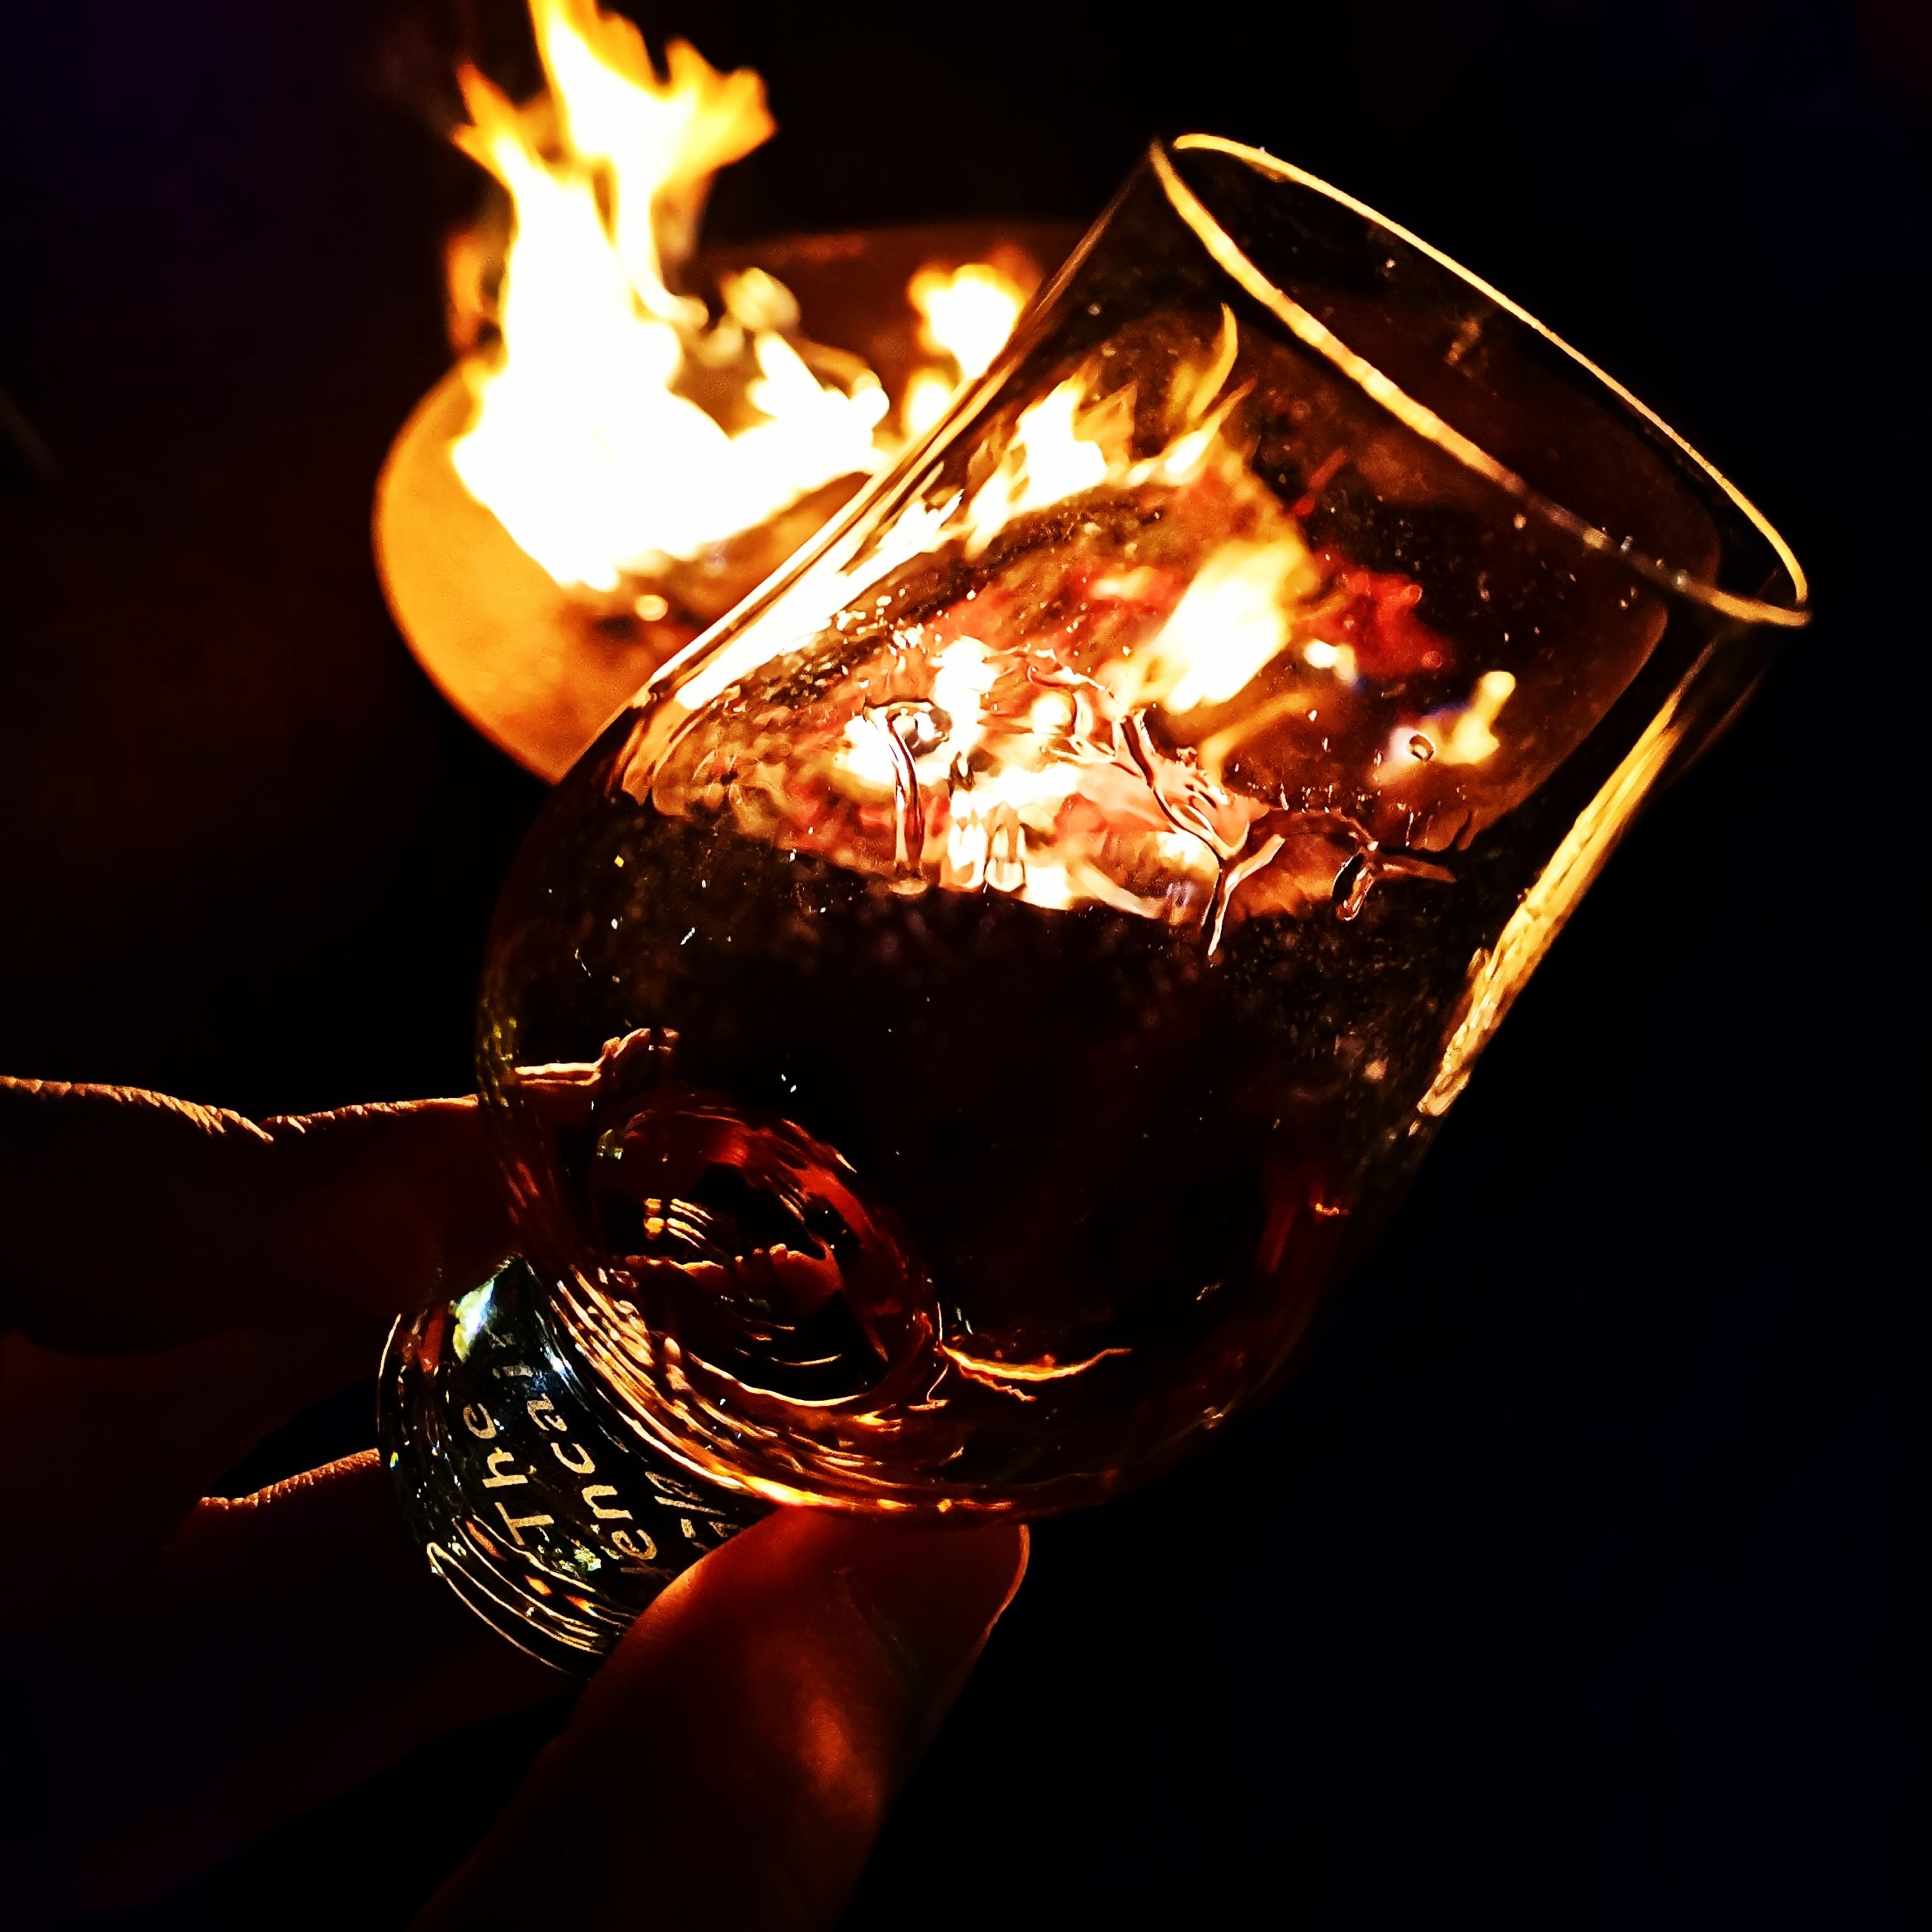 Whisky and Fire